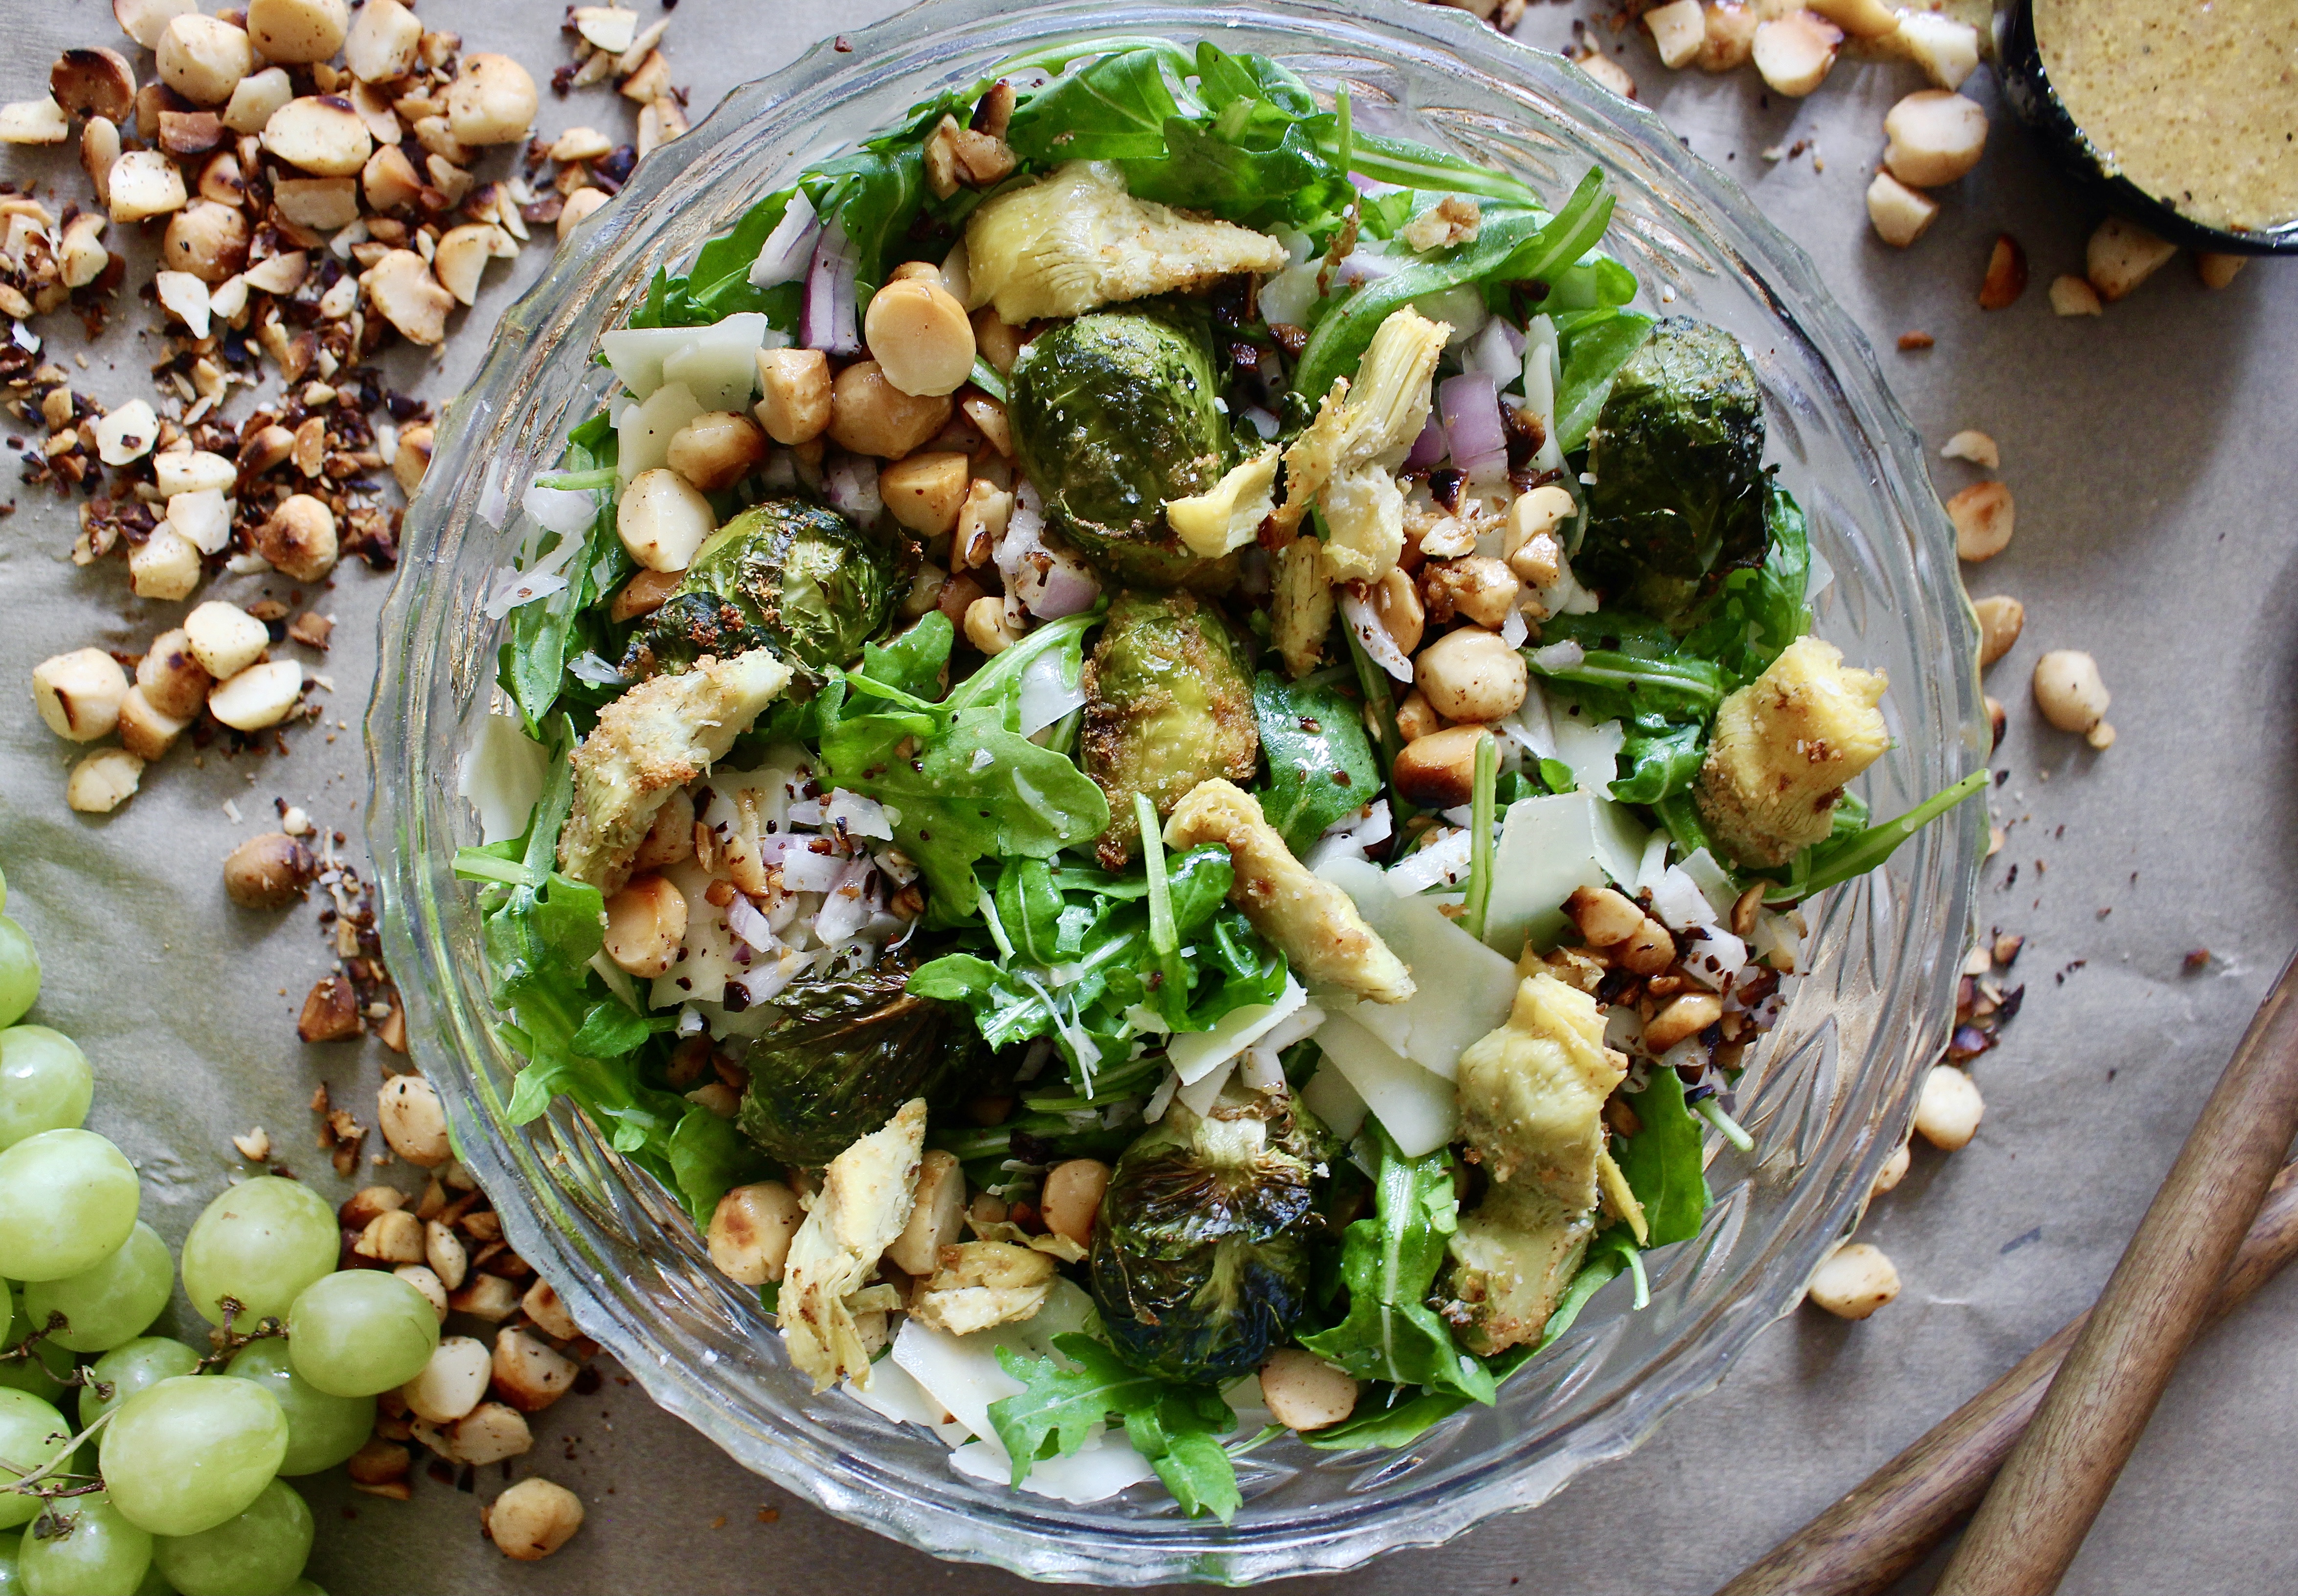 Garlicky charred artichokes and brussels with fresh arugula, parm, and all the crispy crunchy bits tossd in a maple dijon vinaigrette: this Maple Dijon Crispy Artichoke and Brussels Sprouts Salad is the best way to get in those autumn veggies!